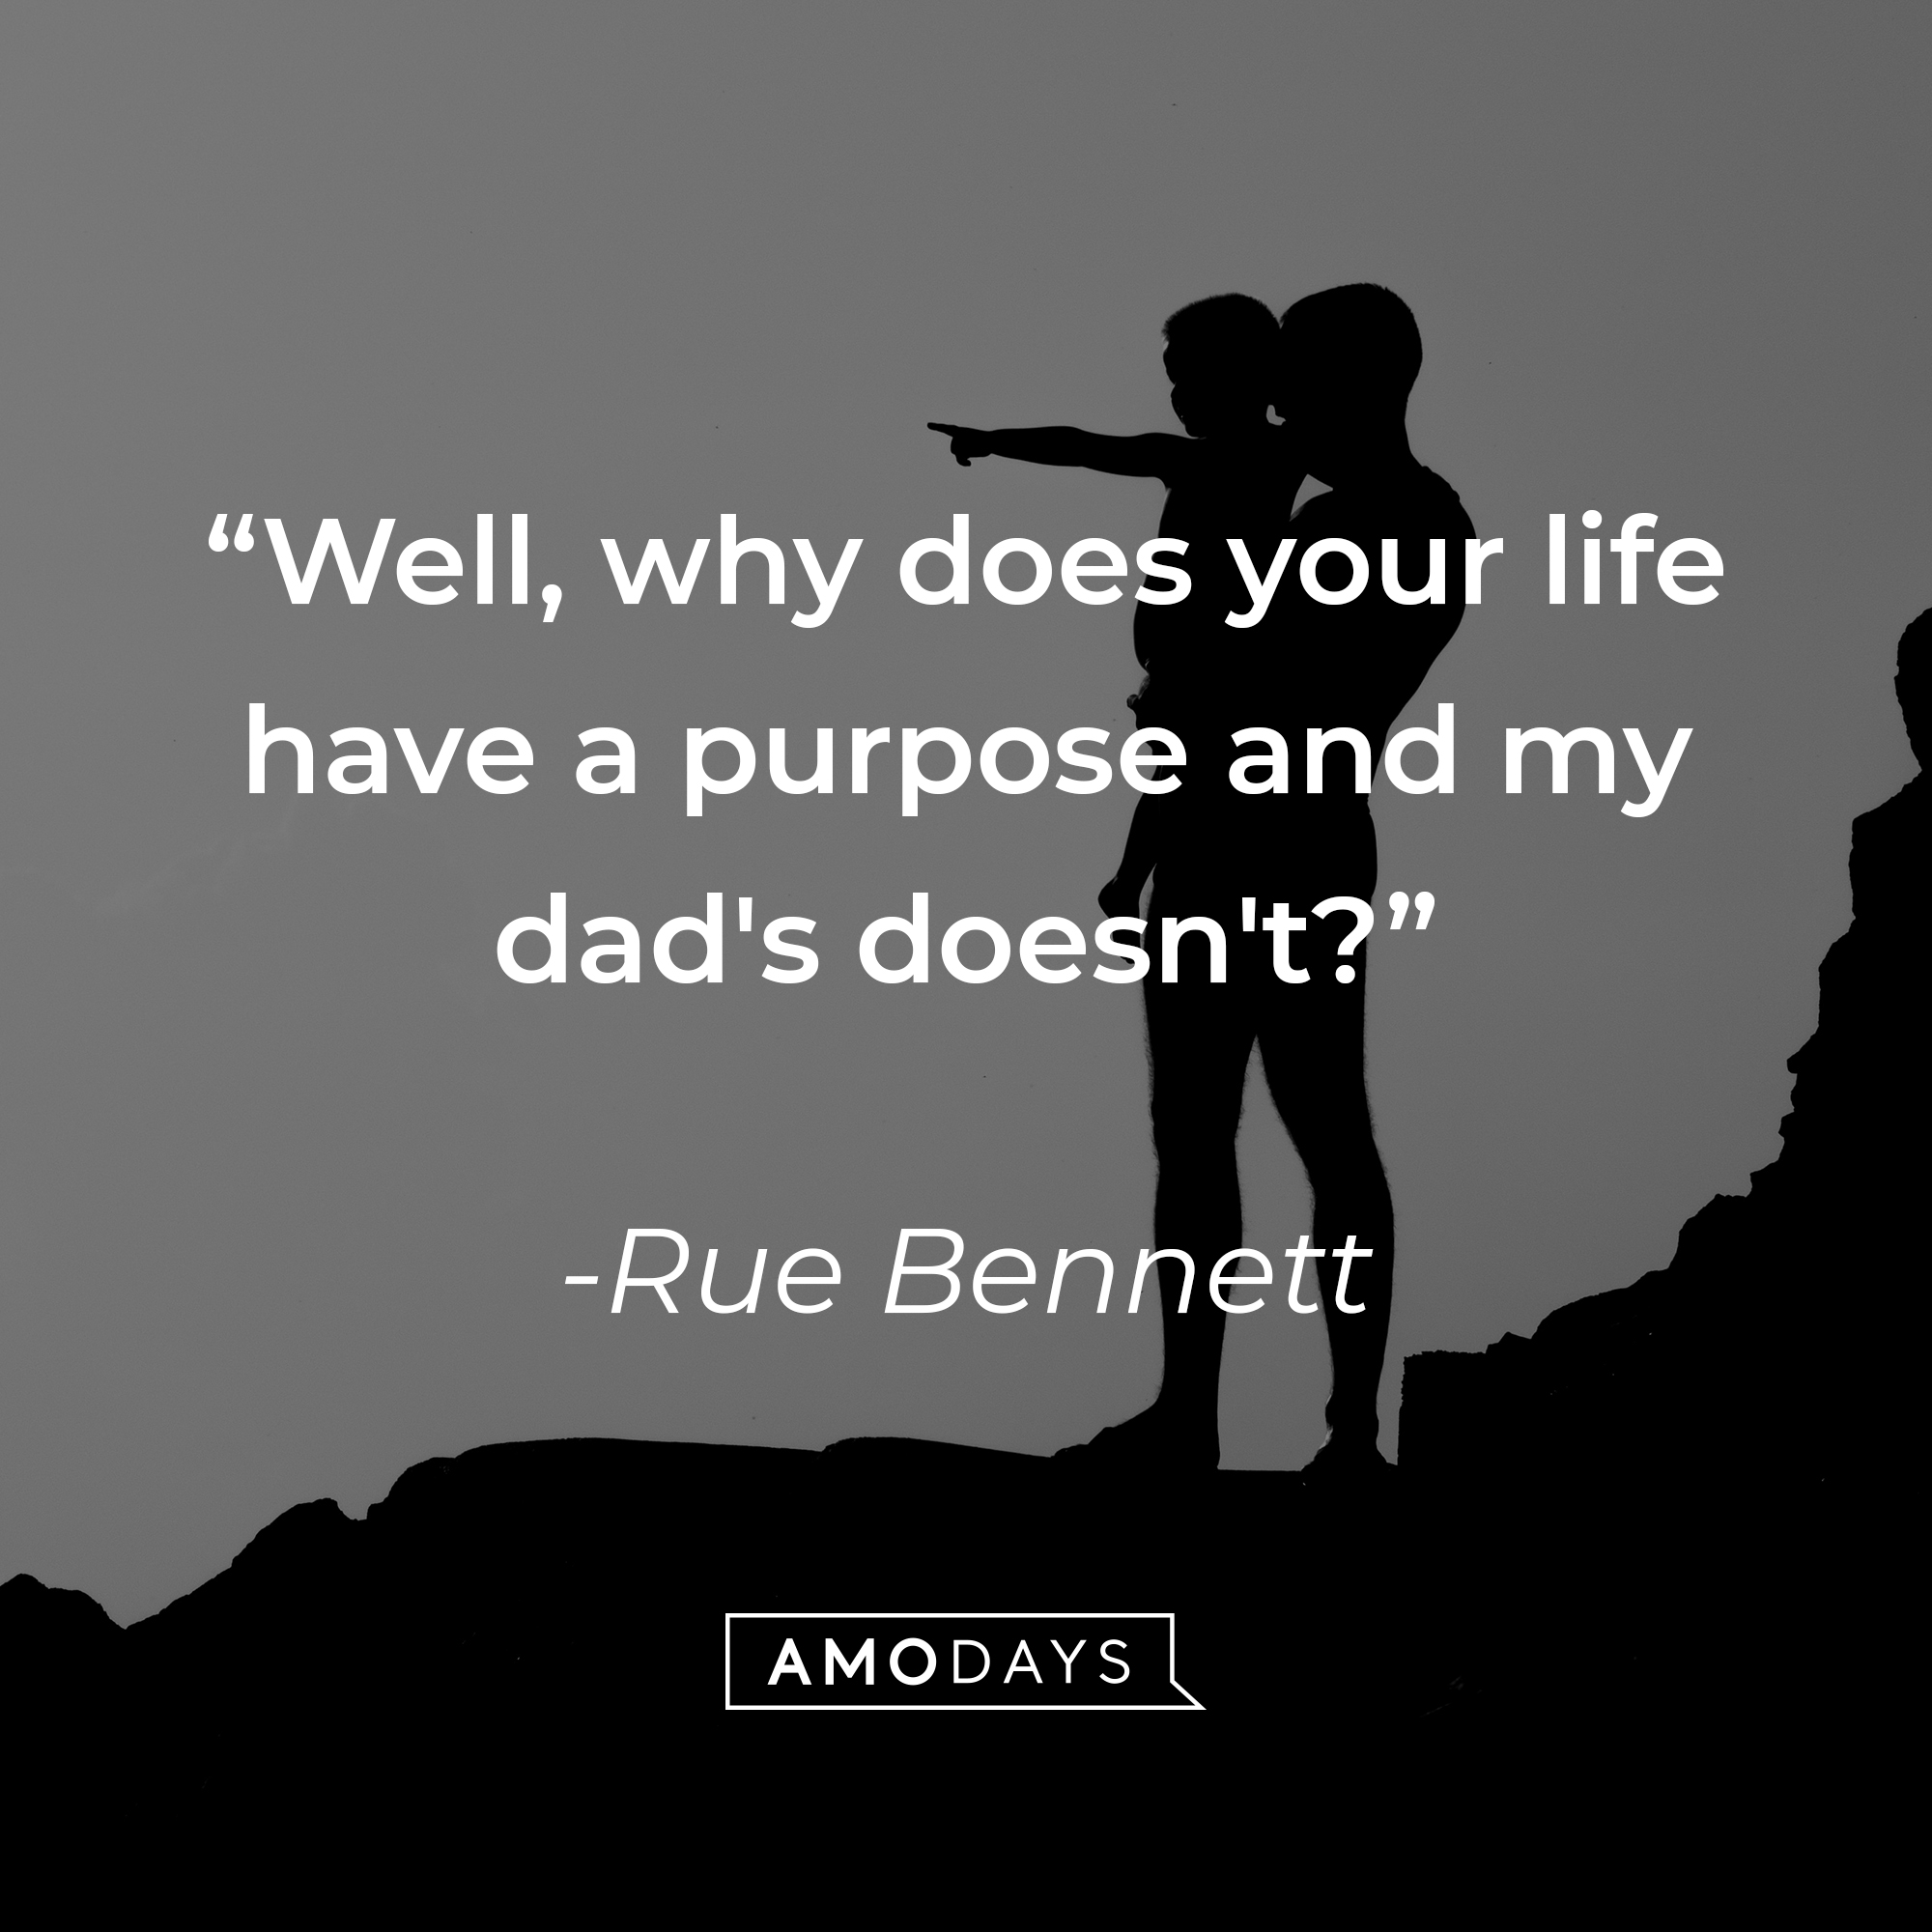 Rue Bennett's quote: "Well, why does your life have a purpose and my dad's doesn't?" | Source: unsplash.com